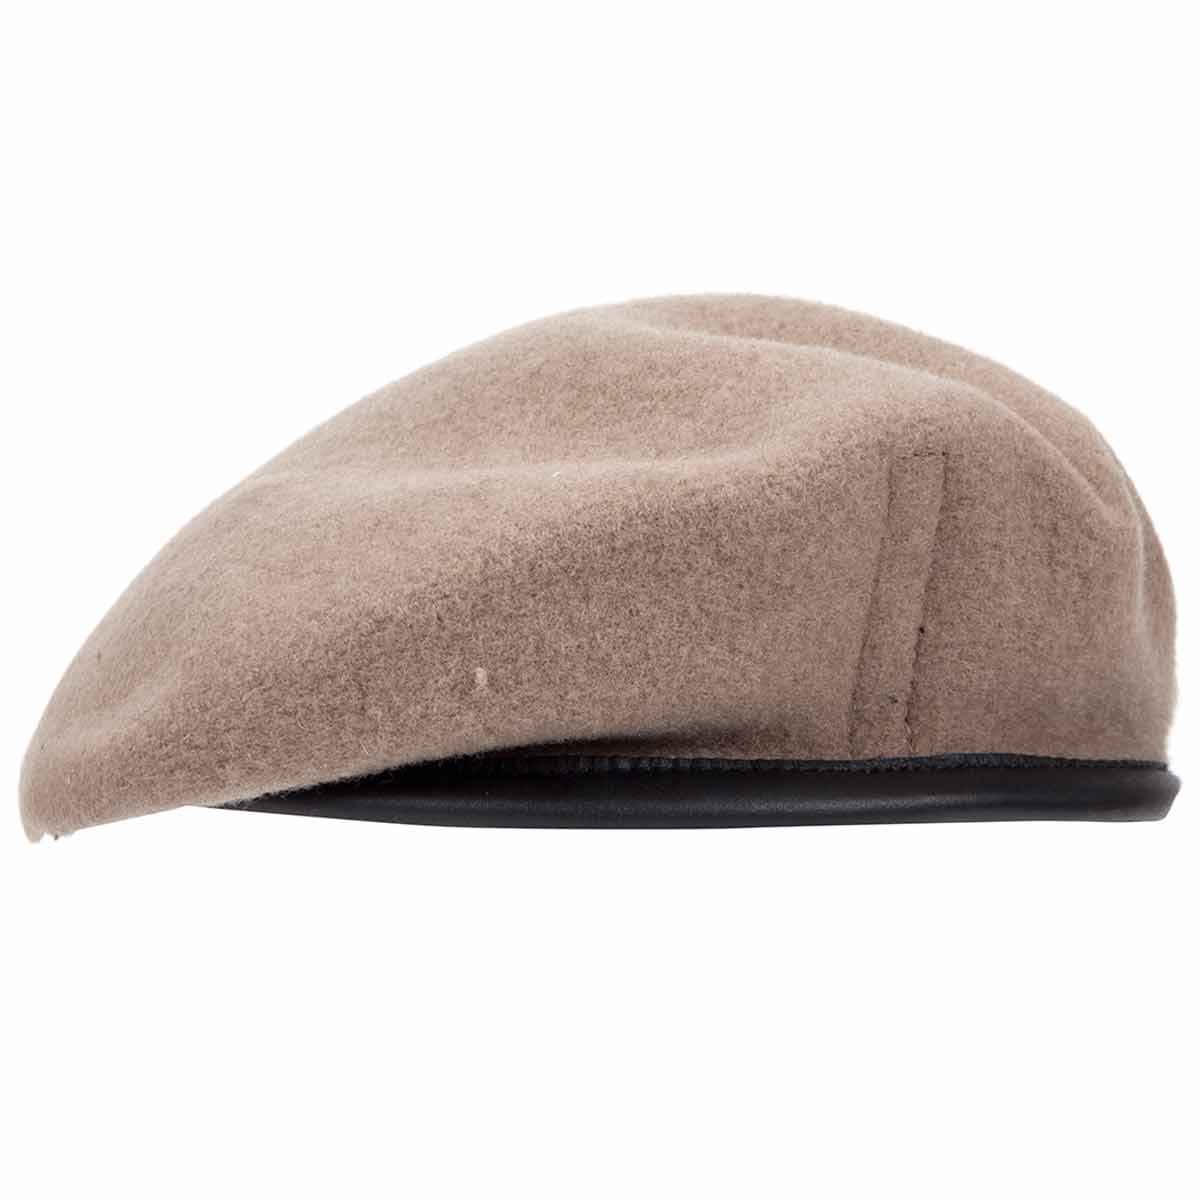 Military Beret 100% Wool Leather Banded Silk Lined Army Cadet Hat Cap 7 Colours 